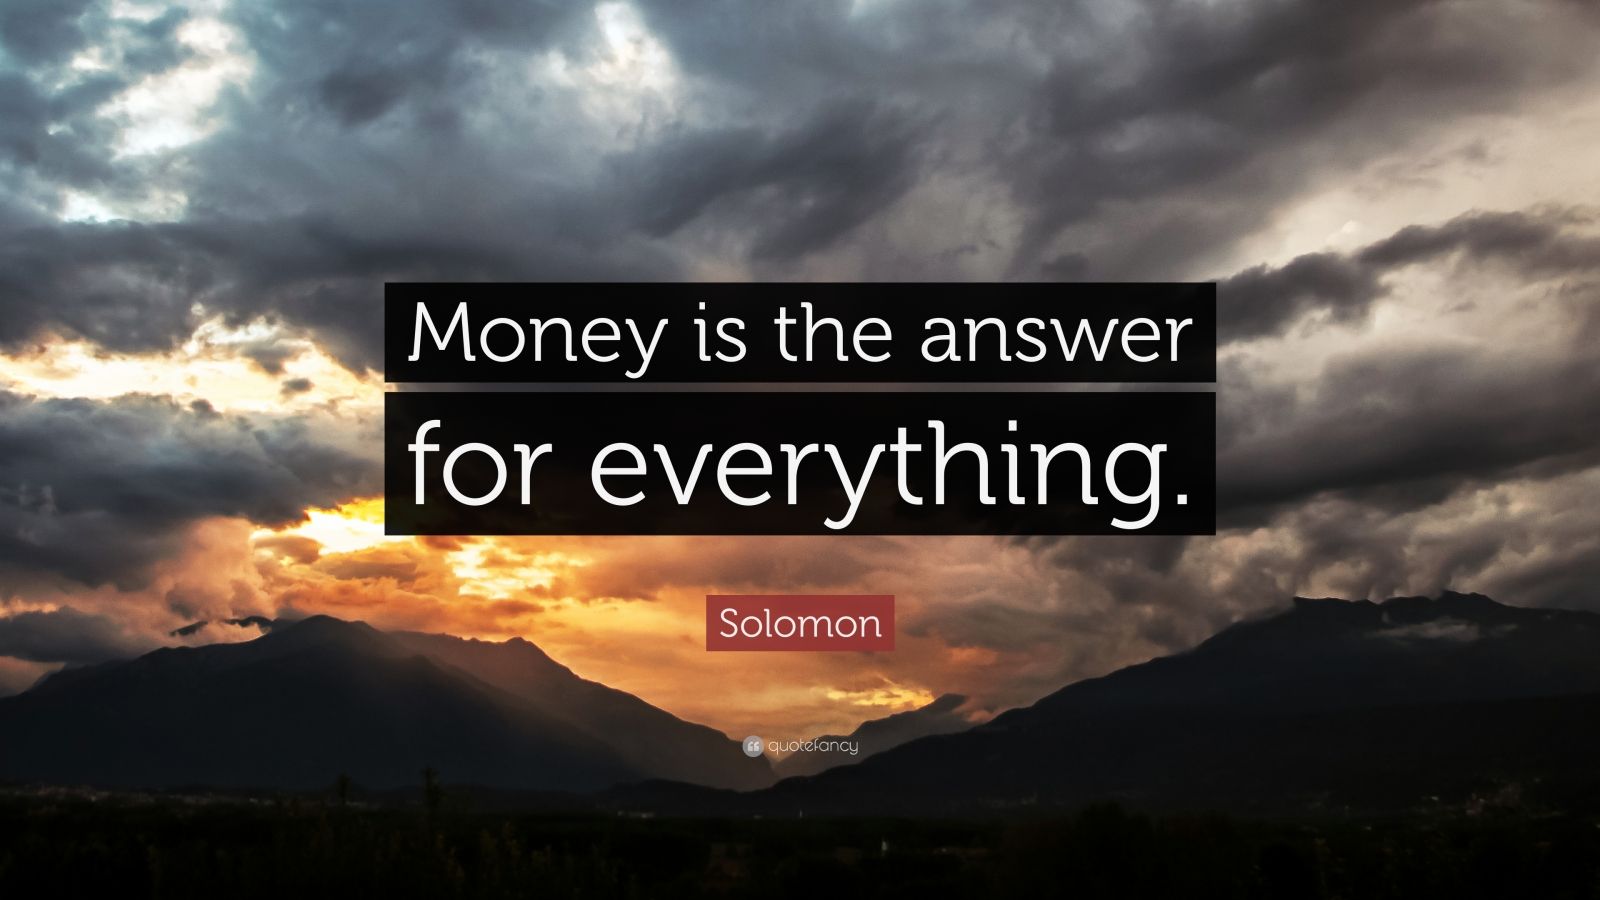 Solomon Quote: "Money is the answer for everything." (7 wallpapers) - Quotefancy